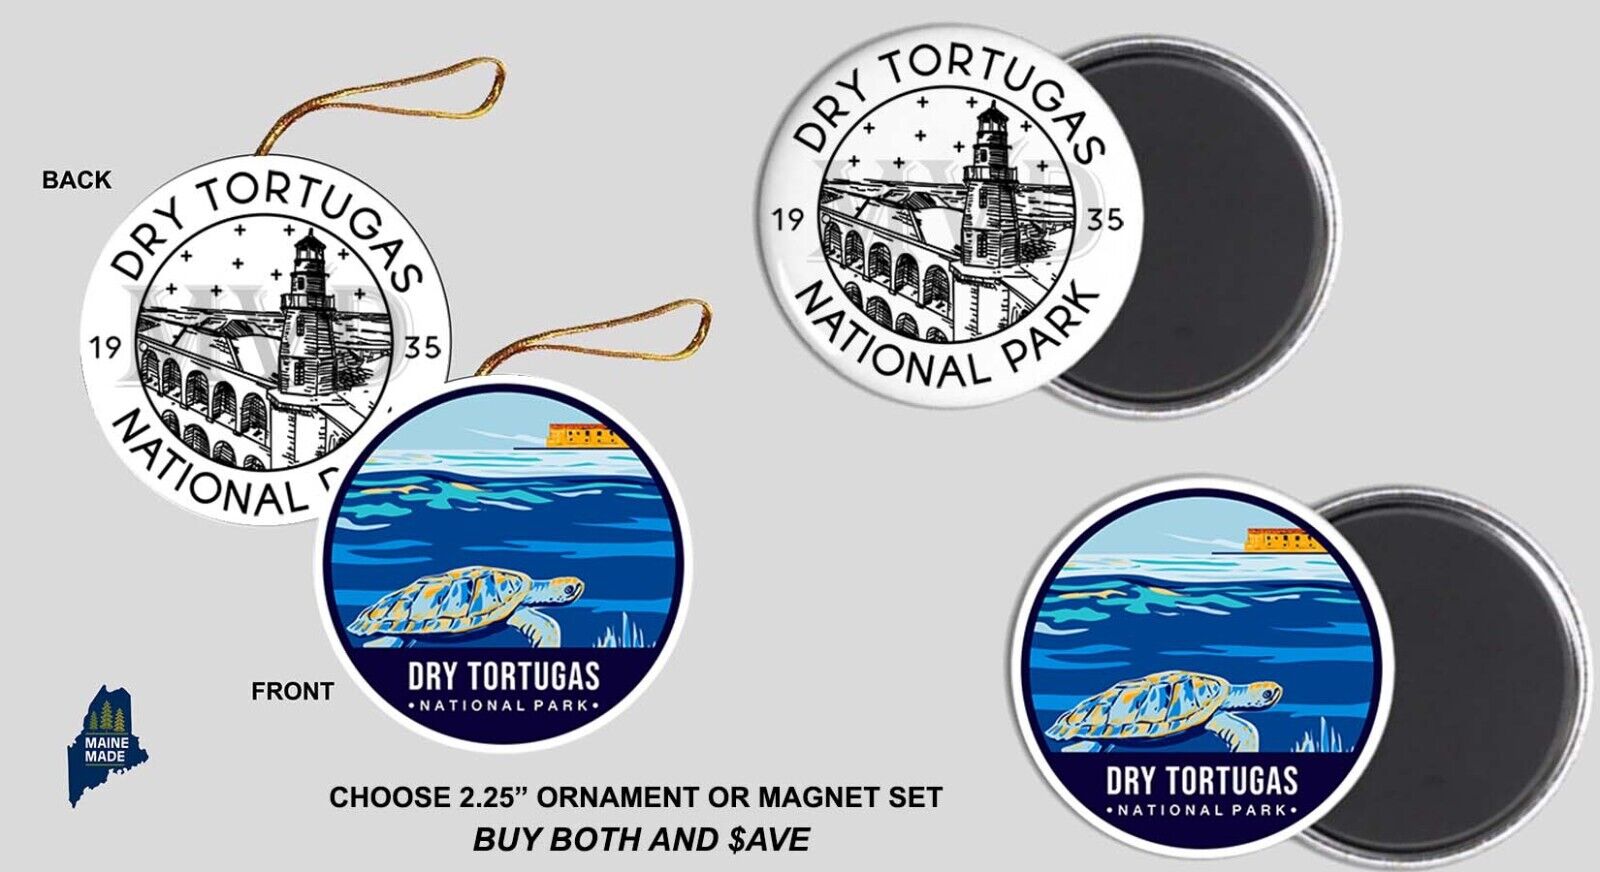 DRY TORTUGAS NATIONAL PARK Ornament / Magnet Set - Vacation Florida NPS Gift